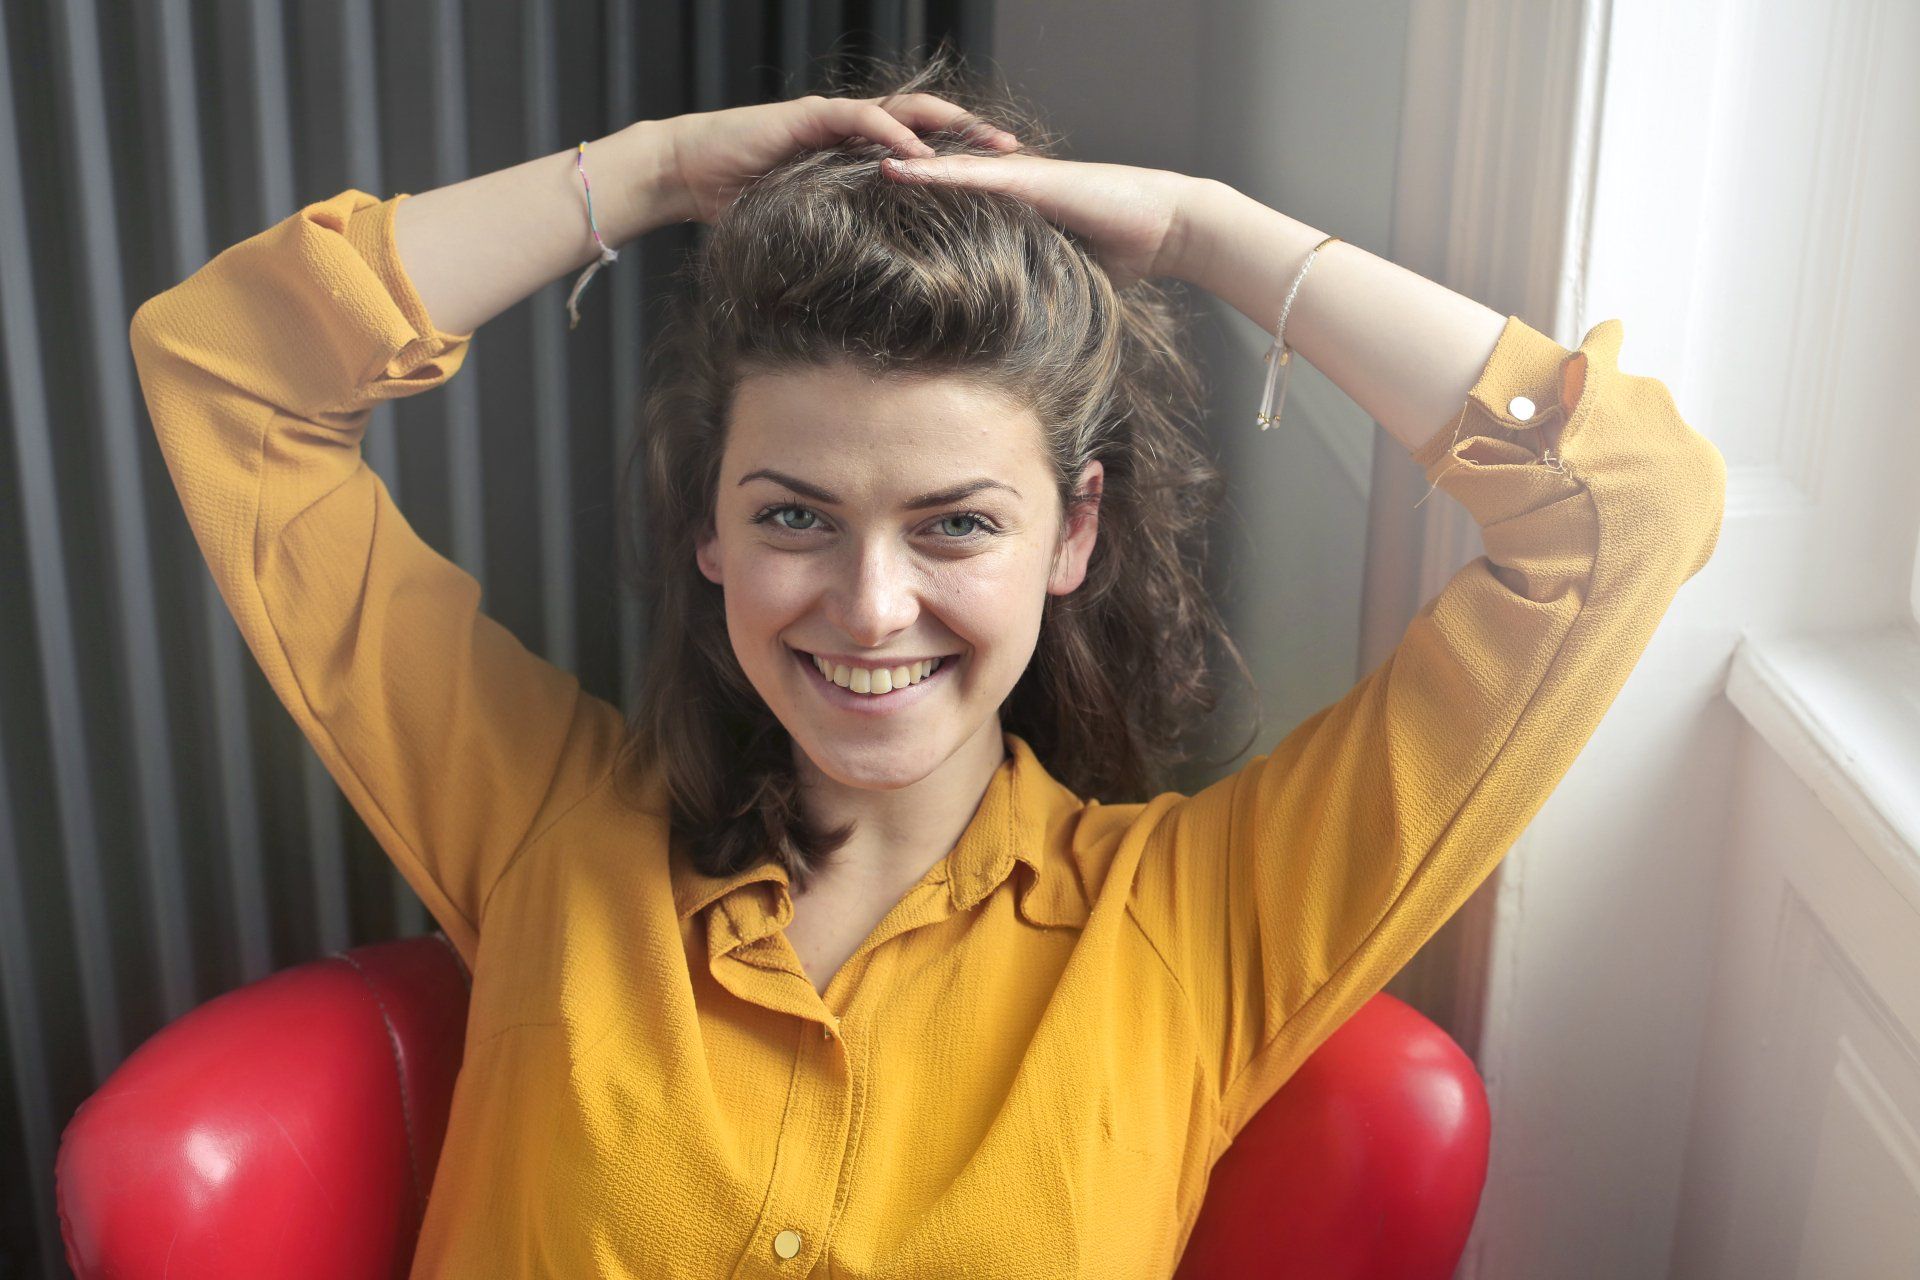 A woman in a yellow shirt is sitting in a red chair with her hands in her hair smiling.